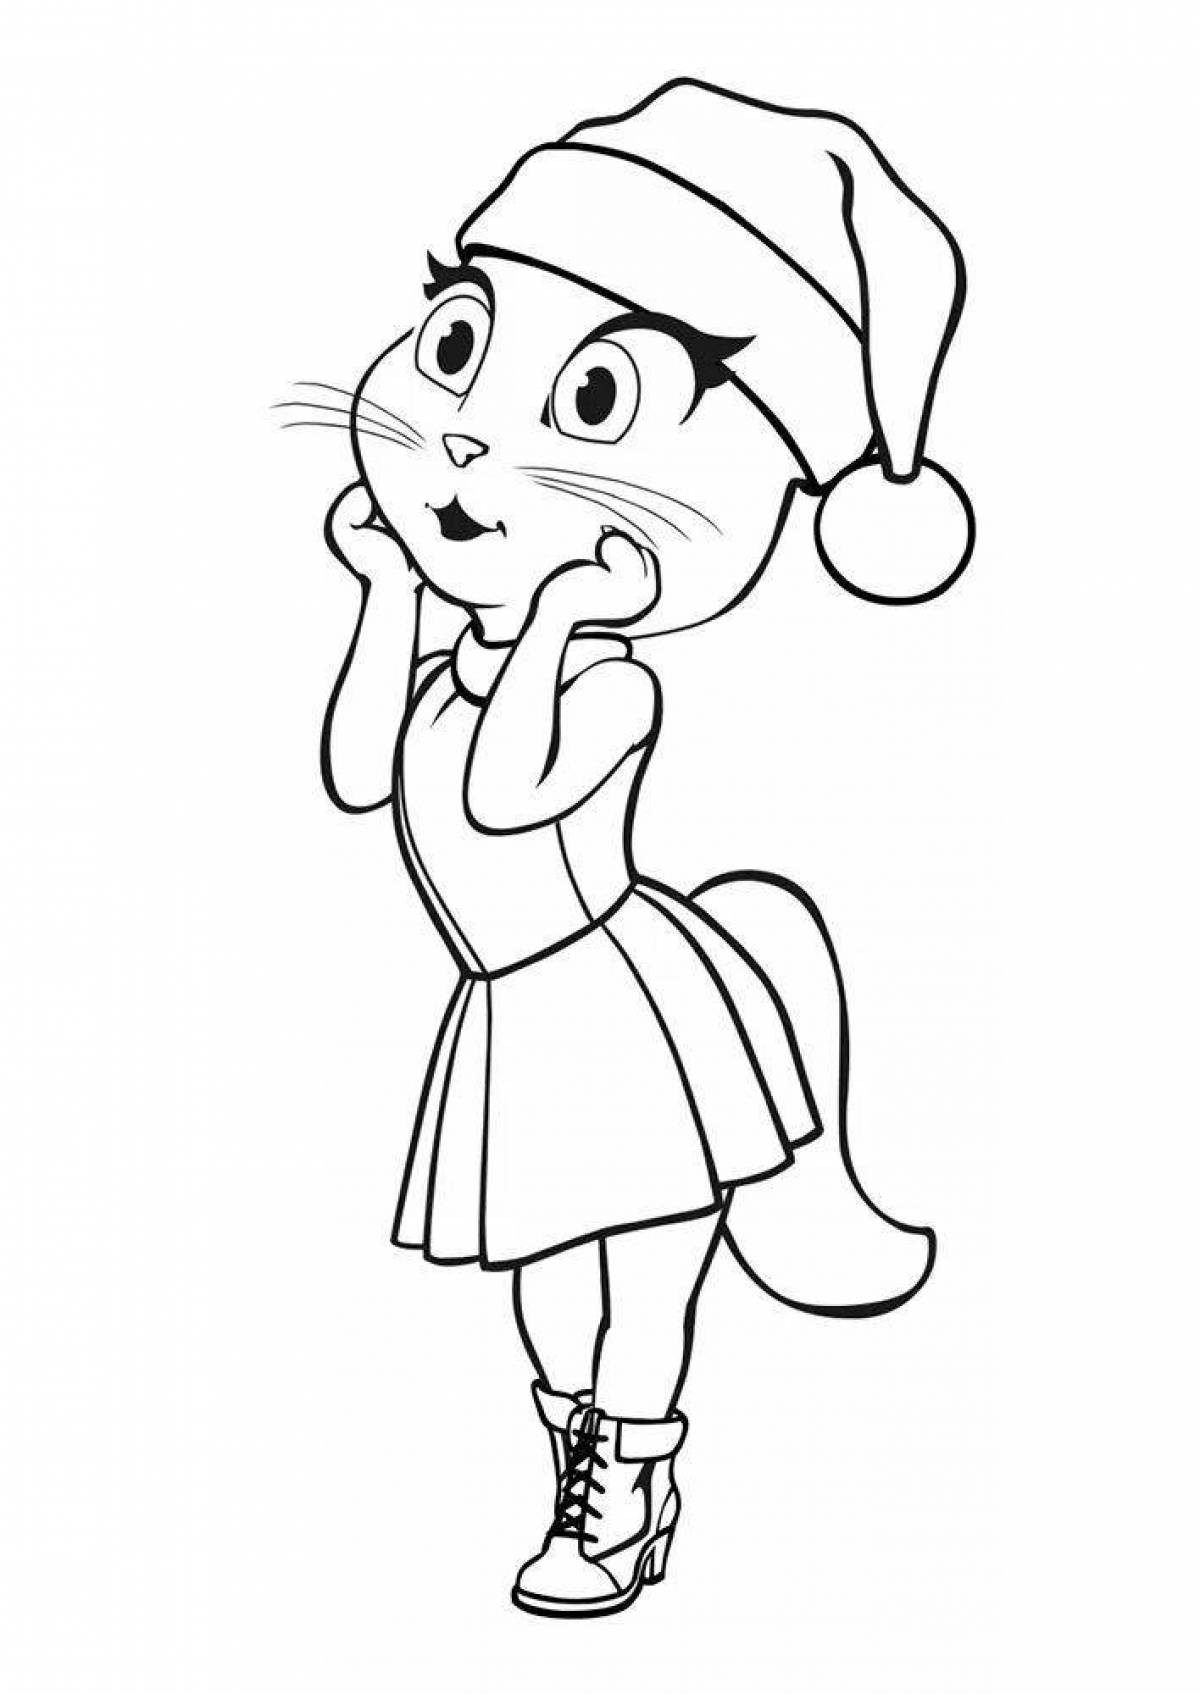 Magic ginger coloring page